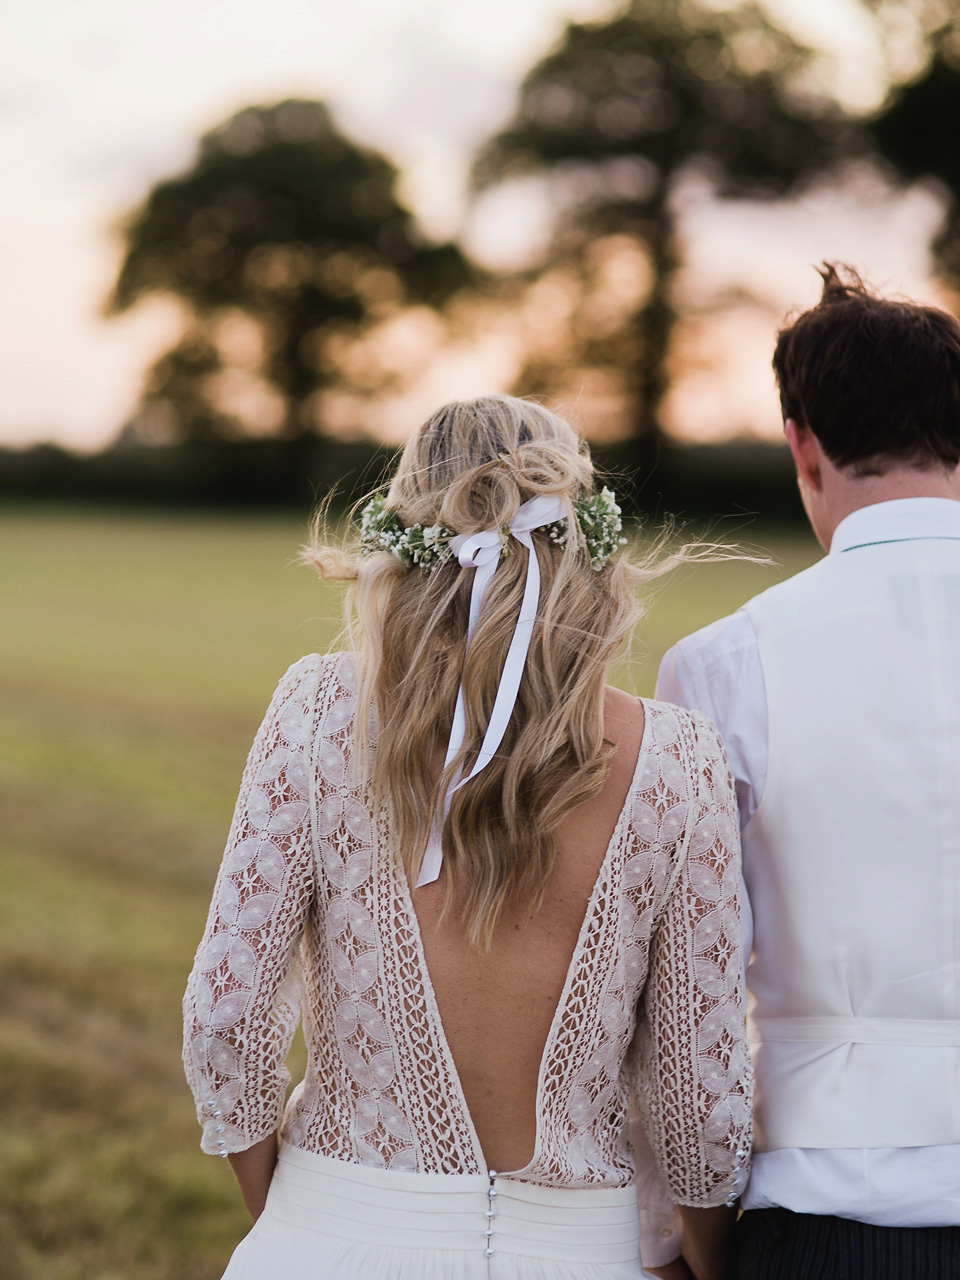 A Chic Laure de Sagazan Gown for a Boho Luxe English Country Wedding. Photography by John Barwood.